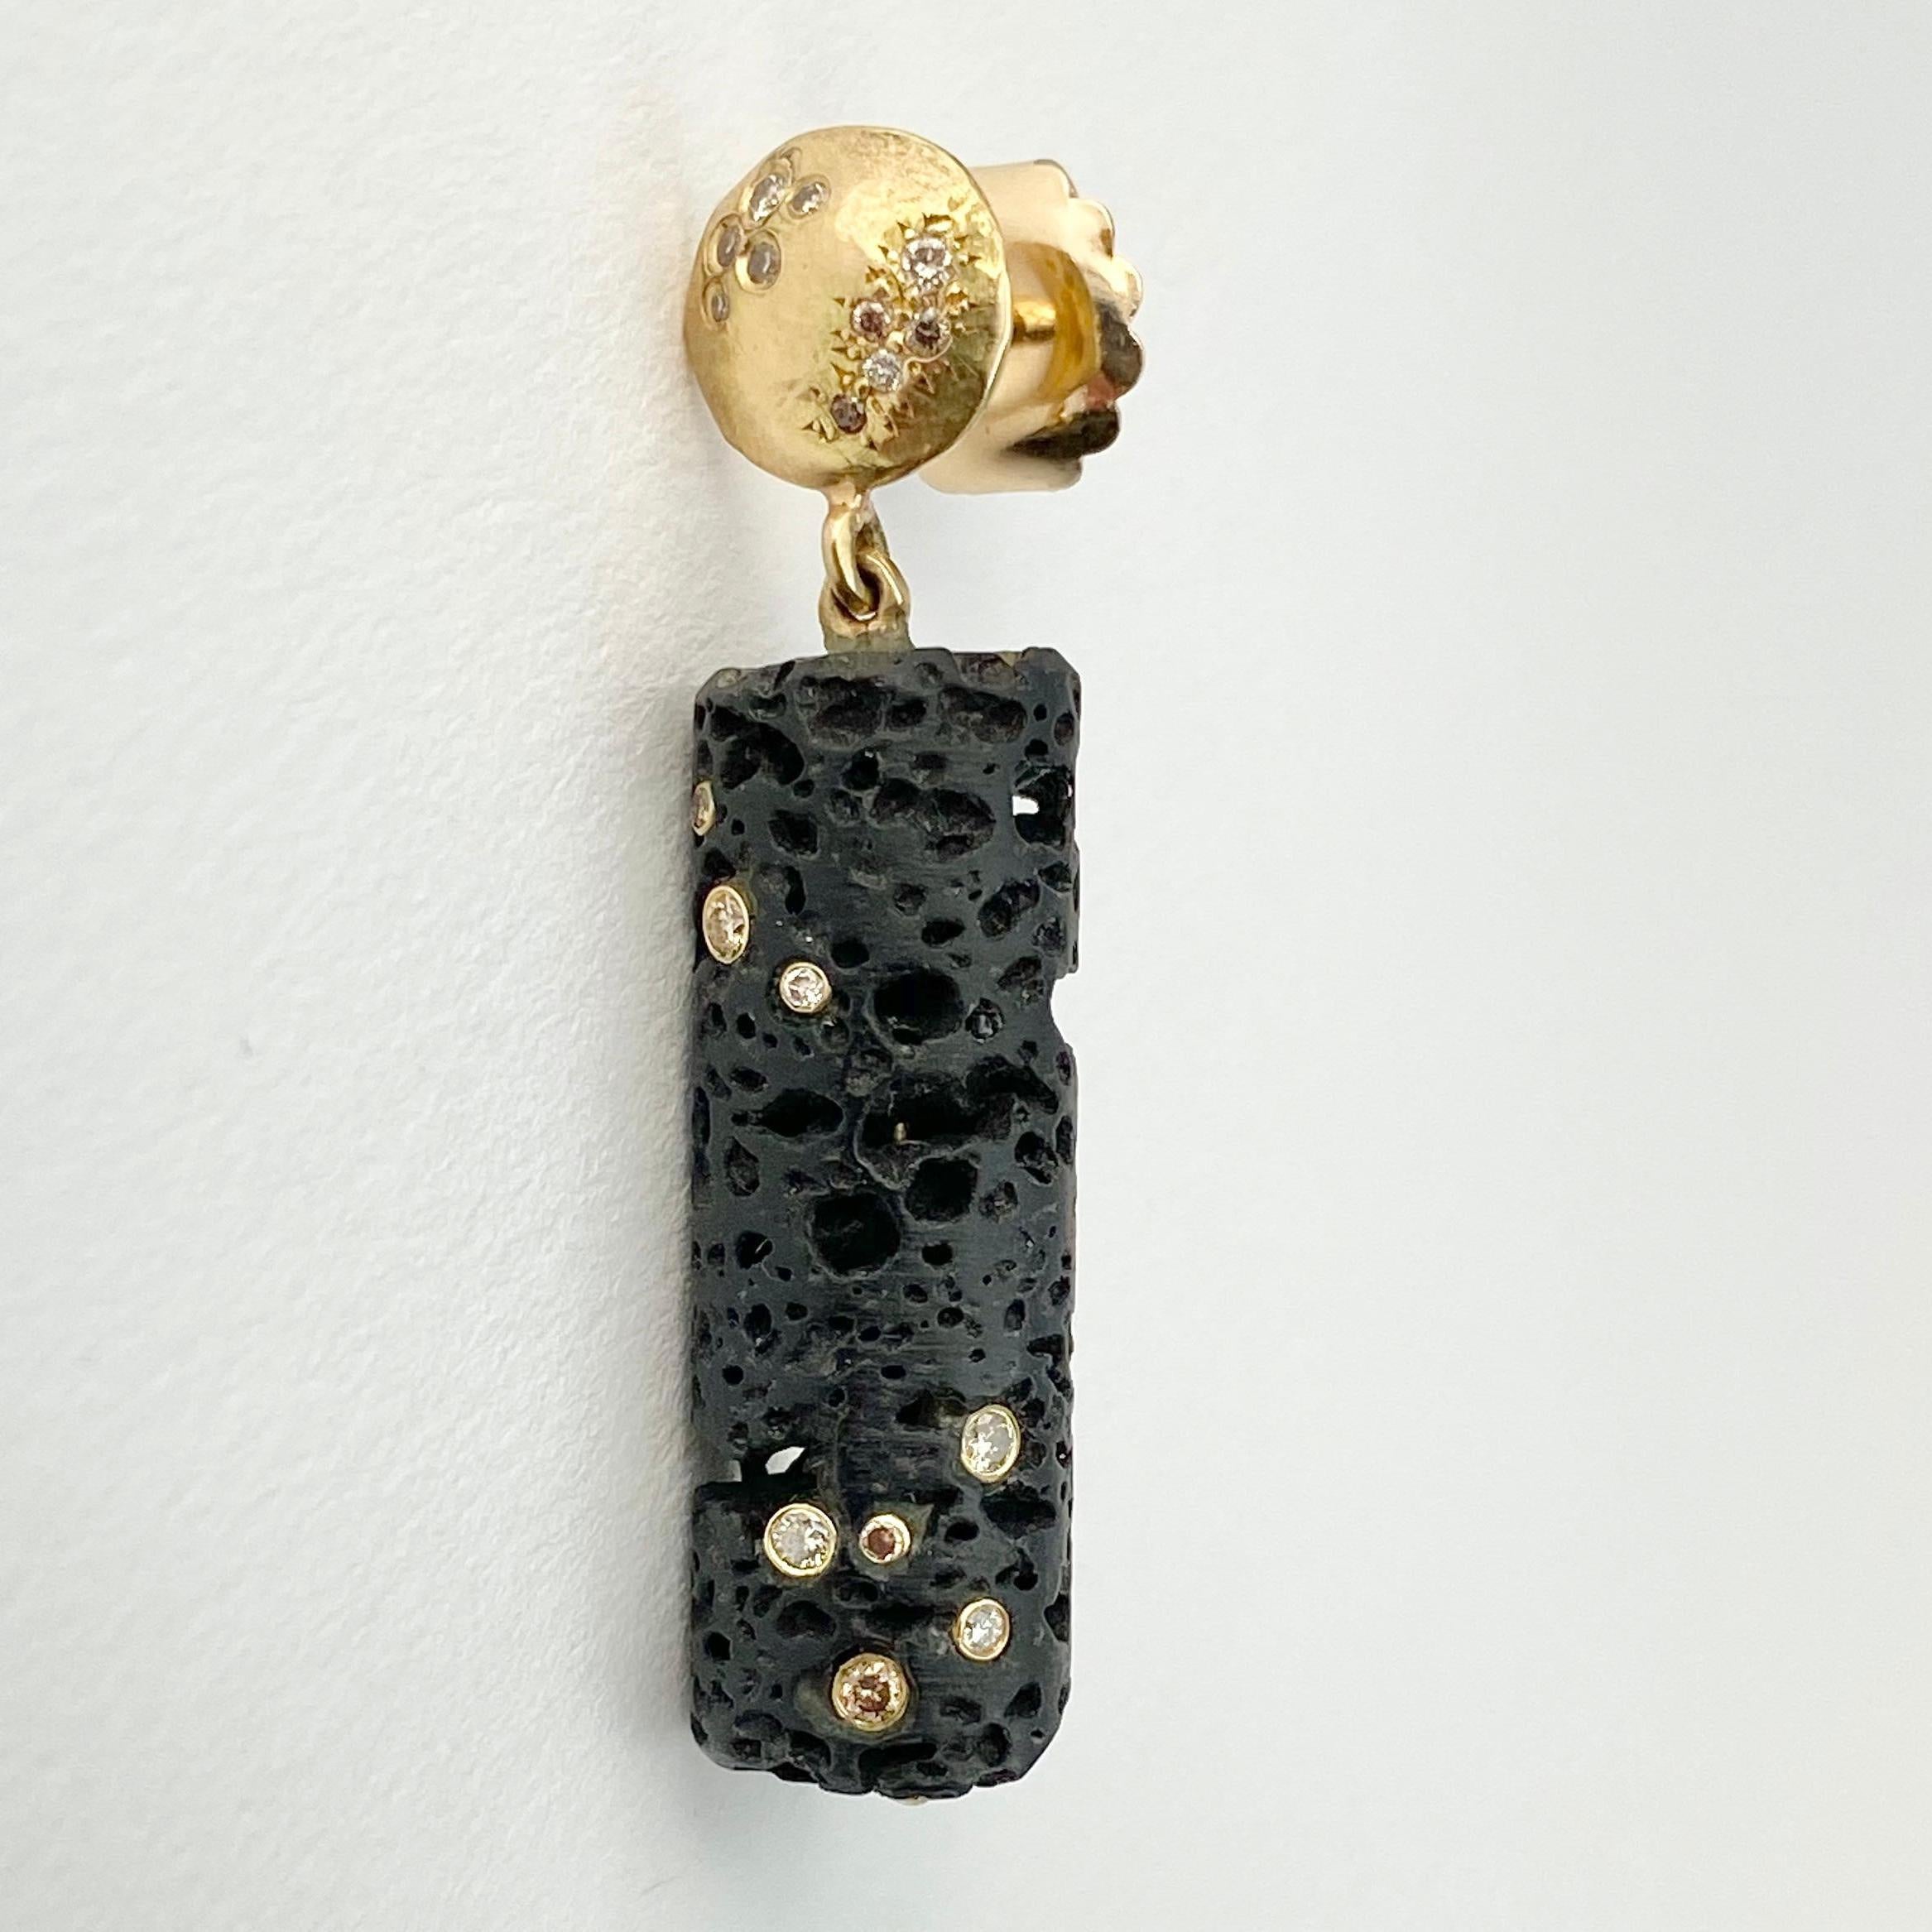 This pair of Lava Bead earrings is hand-crafted with 18-karat recycled yellow gold, and features two cylindrical black lava beads, and 36 round champagne accent diamonds- some flush mounted inside the natural indentions. The lava beads dangle from